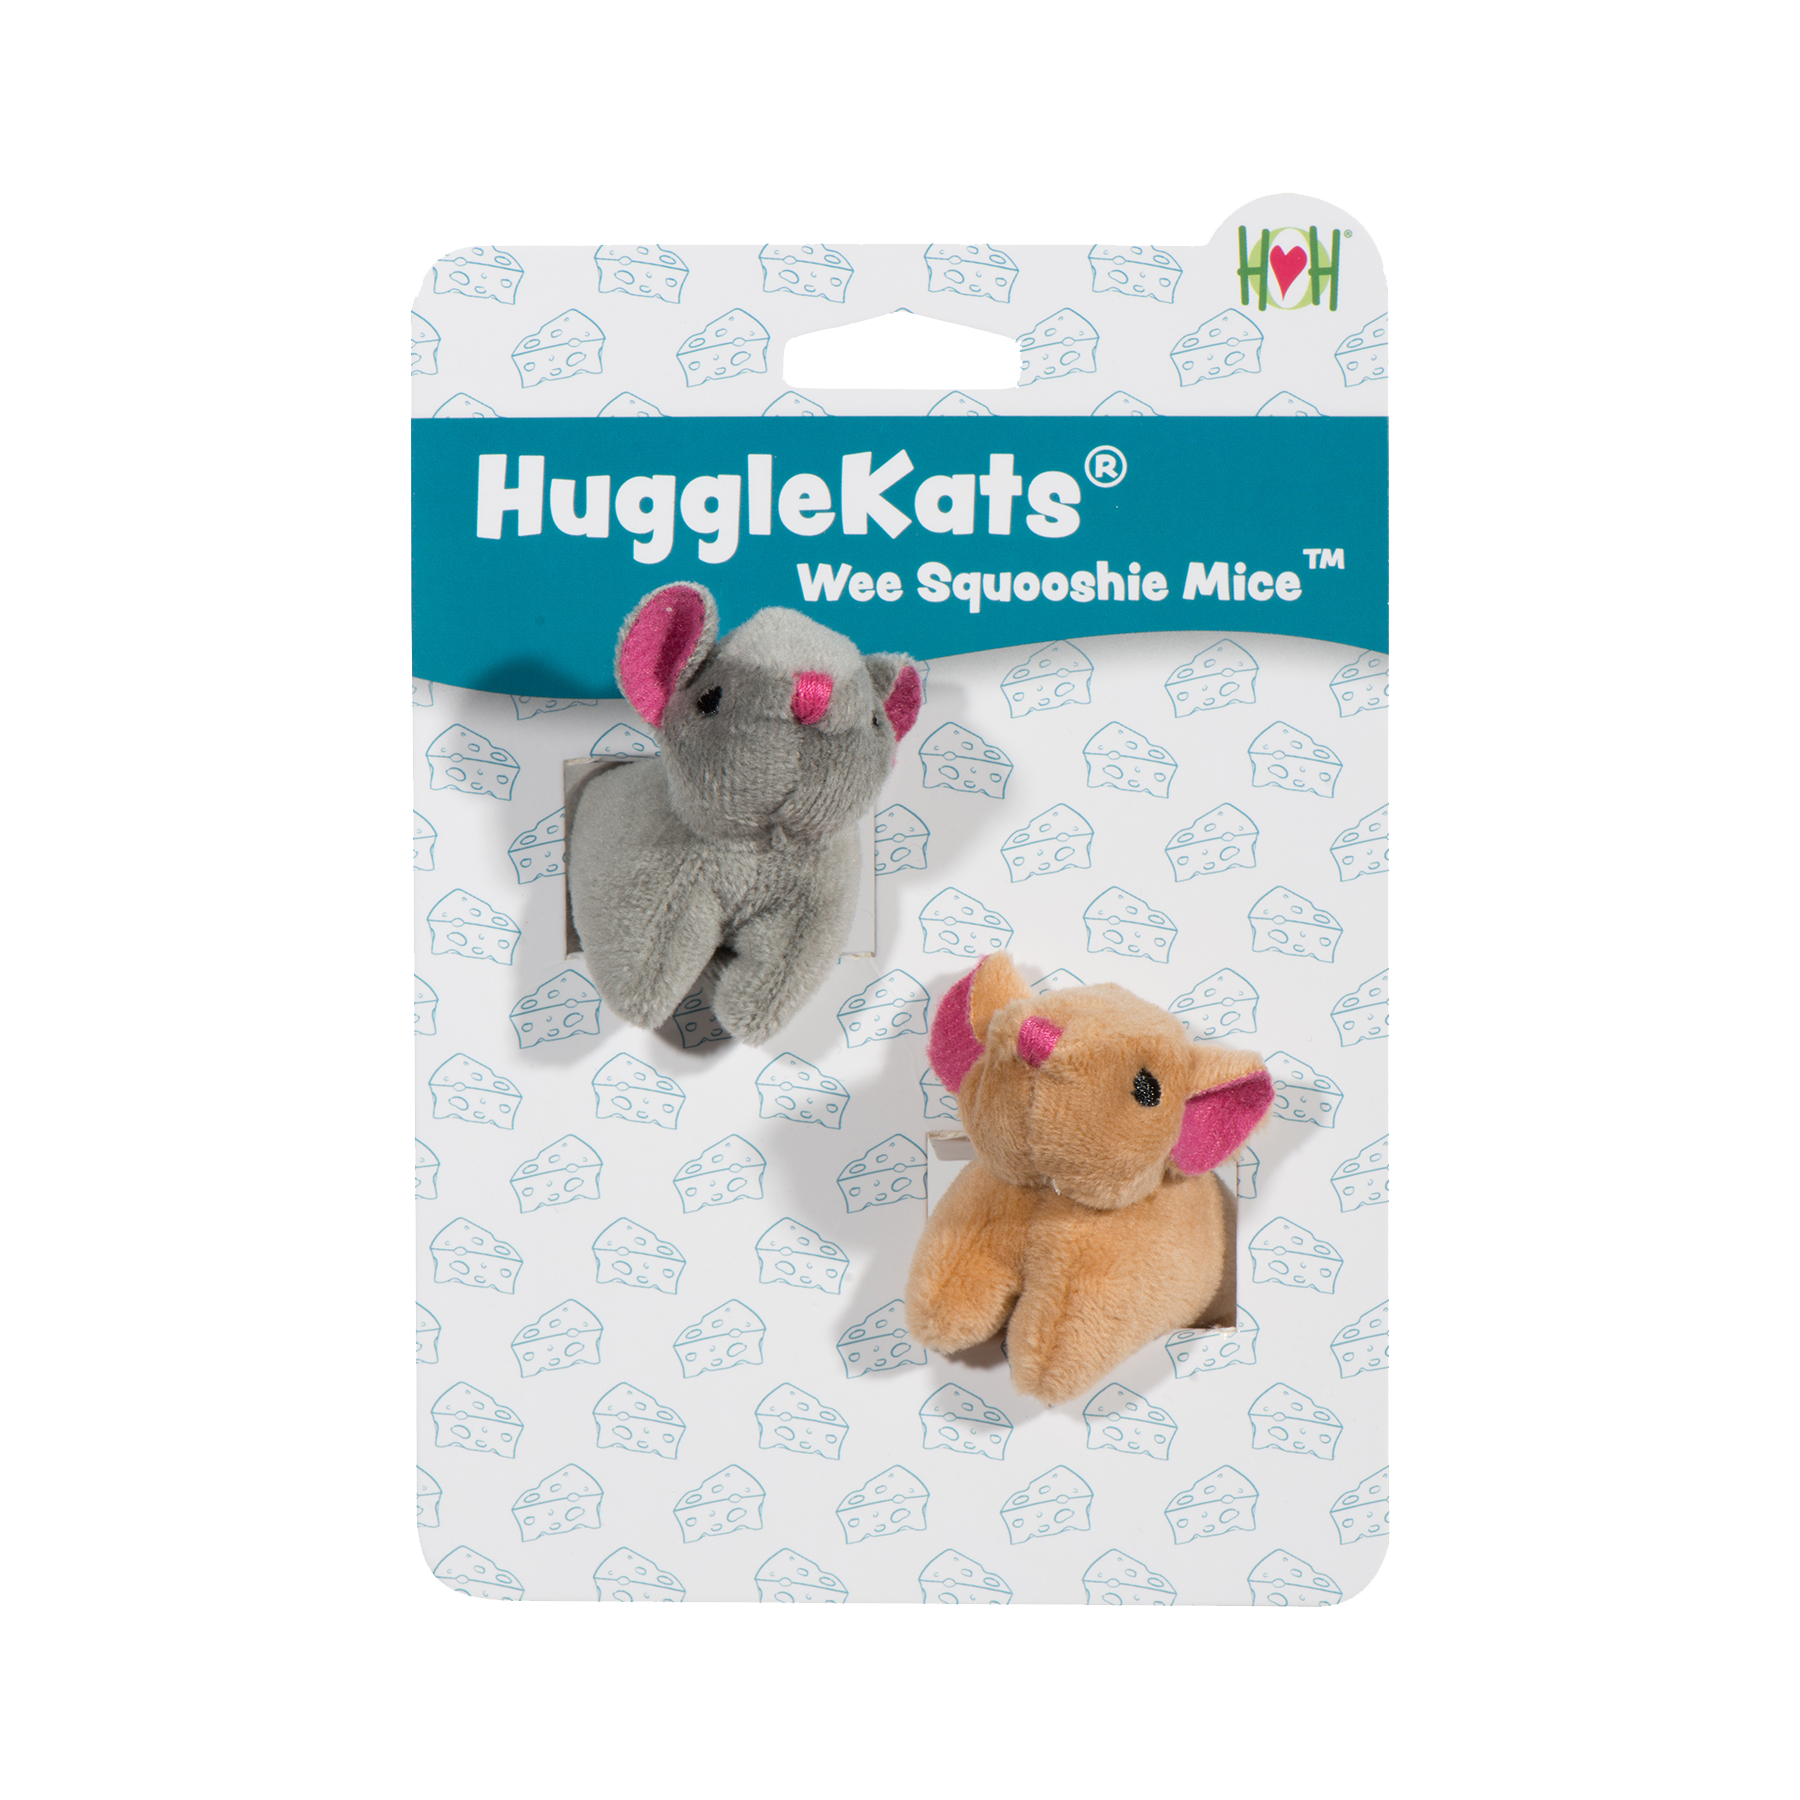 HuggleKats® Wee Squooshie™ Mice Cat Toys, 2 Pack